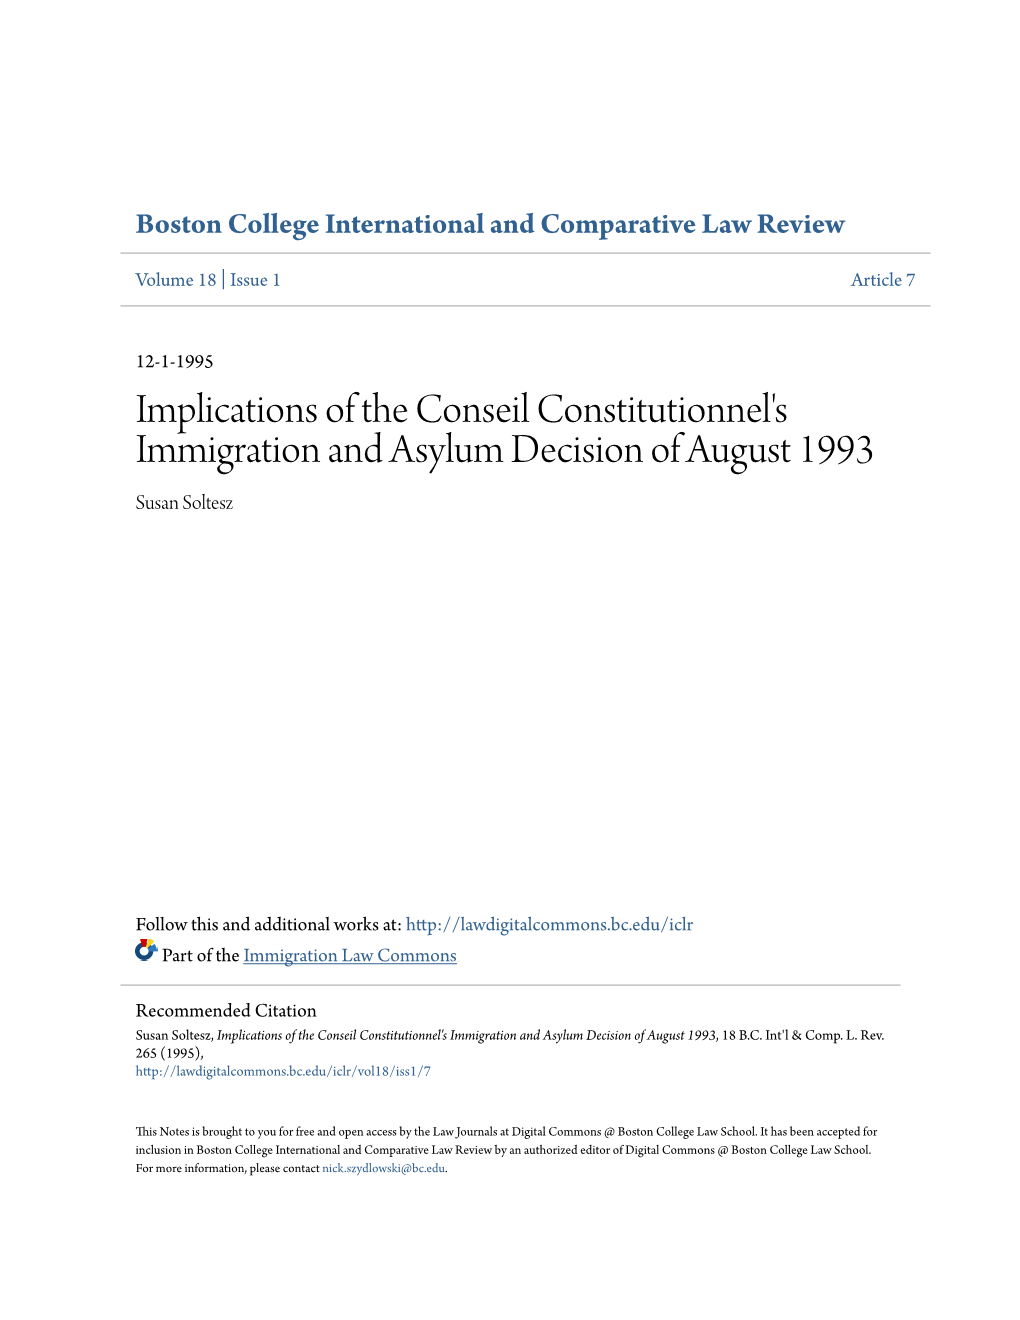 Implications of the Conseil Constitutionnel's Immigration and Asylum Decision of August 1993 Susan Soltesz